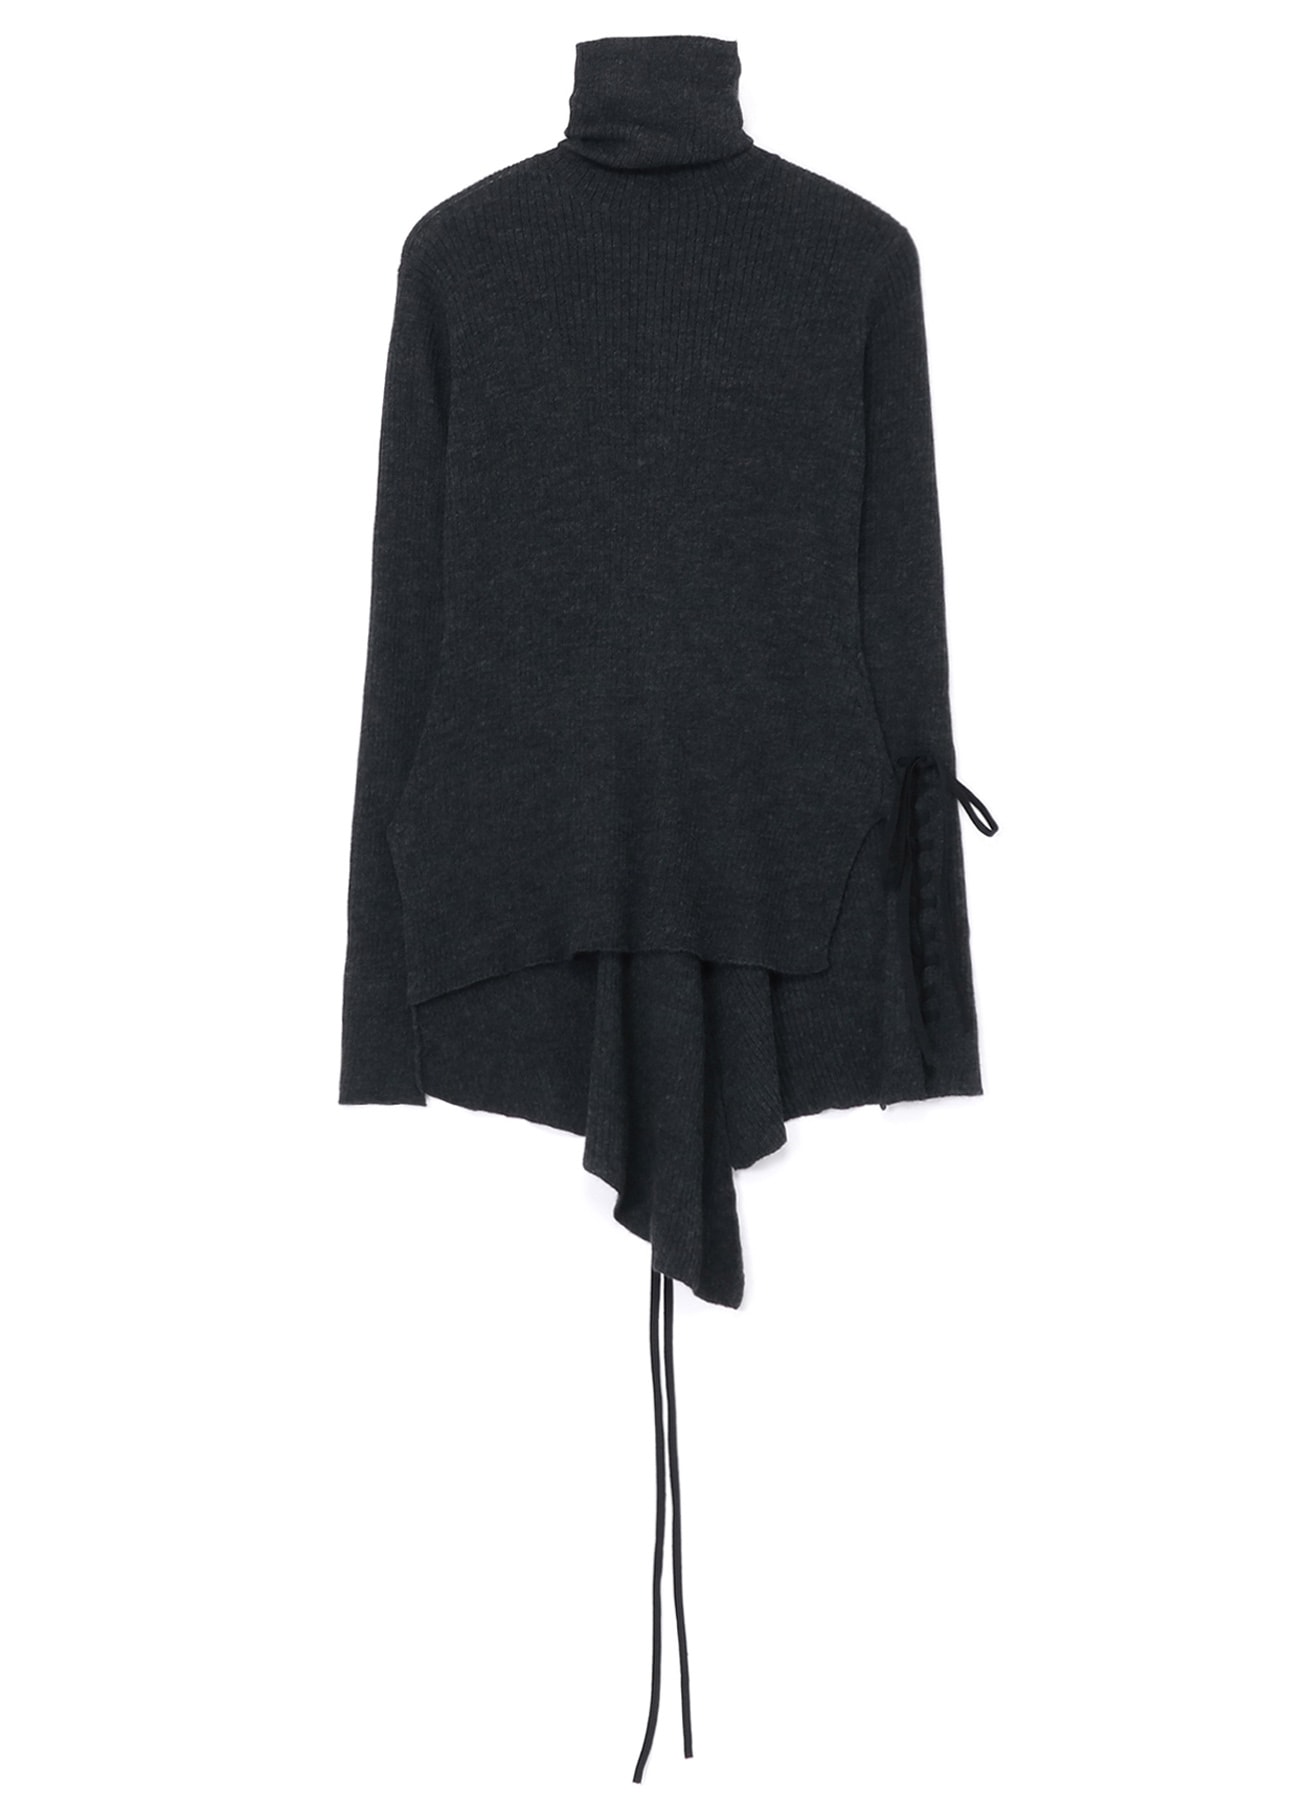 WOOL LACE-UP BACK/SLEEVE DETAIL SWEATER(S Charcoal): Y's｜THE SHOP